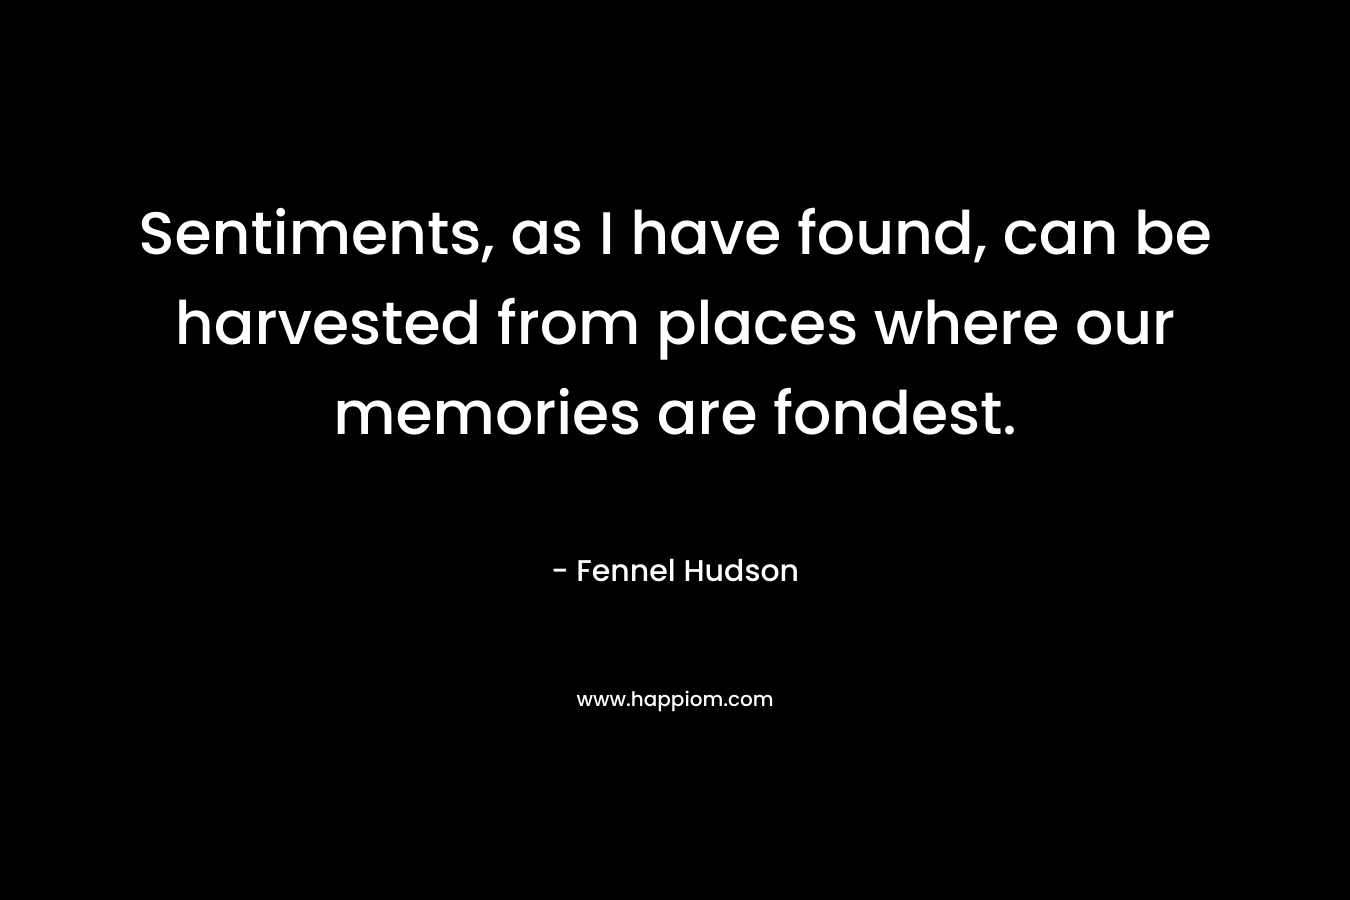 Sentiments, as I have found, can be harvested from places where our memories are fondest.